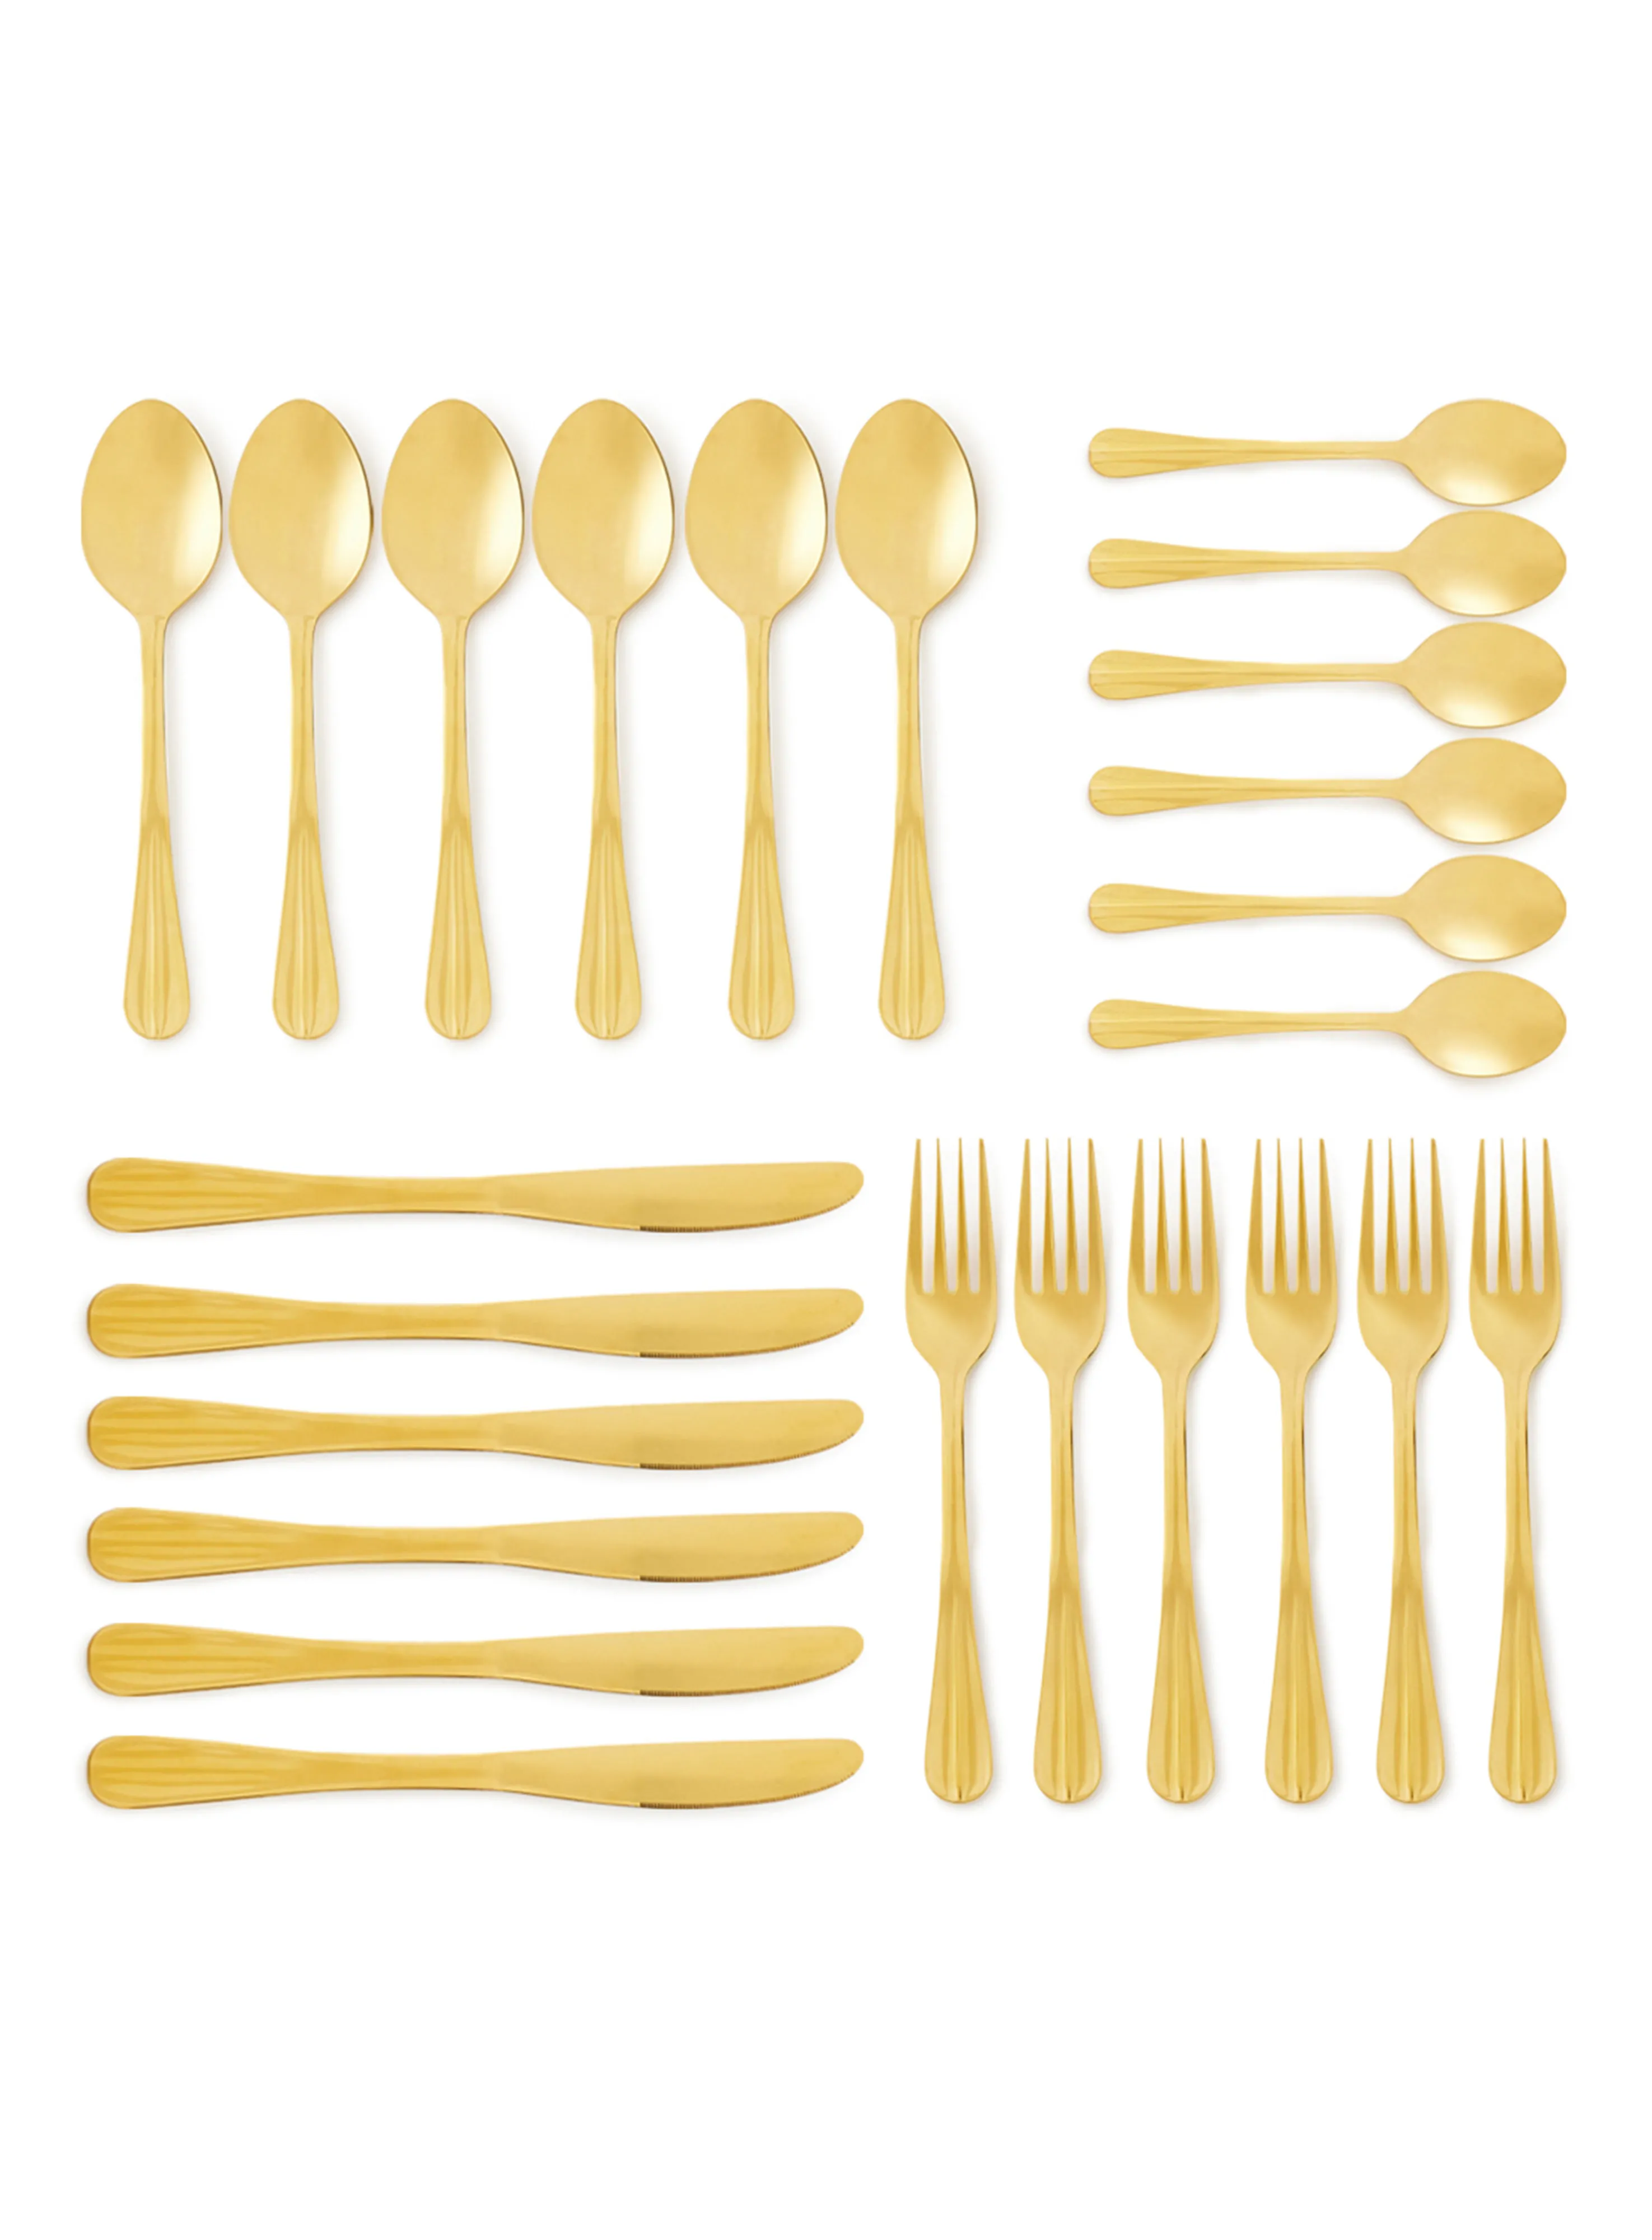 noon east 24 Piece Cutlery Set - Made Of Stainless Steel - Silverware Flatware - Spoons And Forks Set, Spoon Set - Table Spoons, Tea Spoons, Forks, Knives - Serves 6 - Design Gold Flowrish